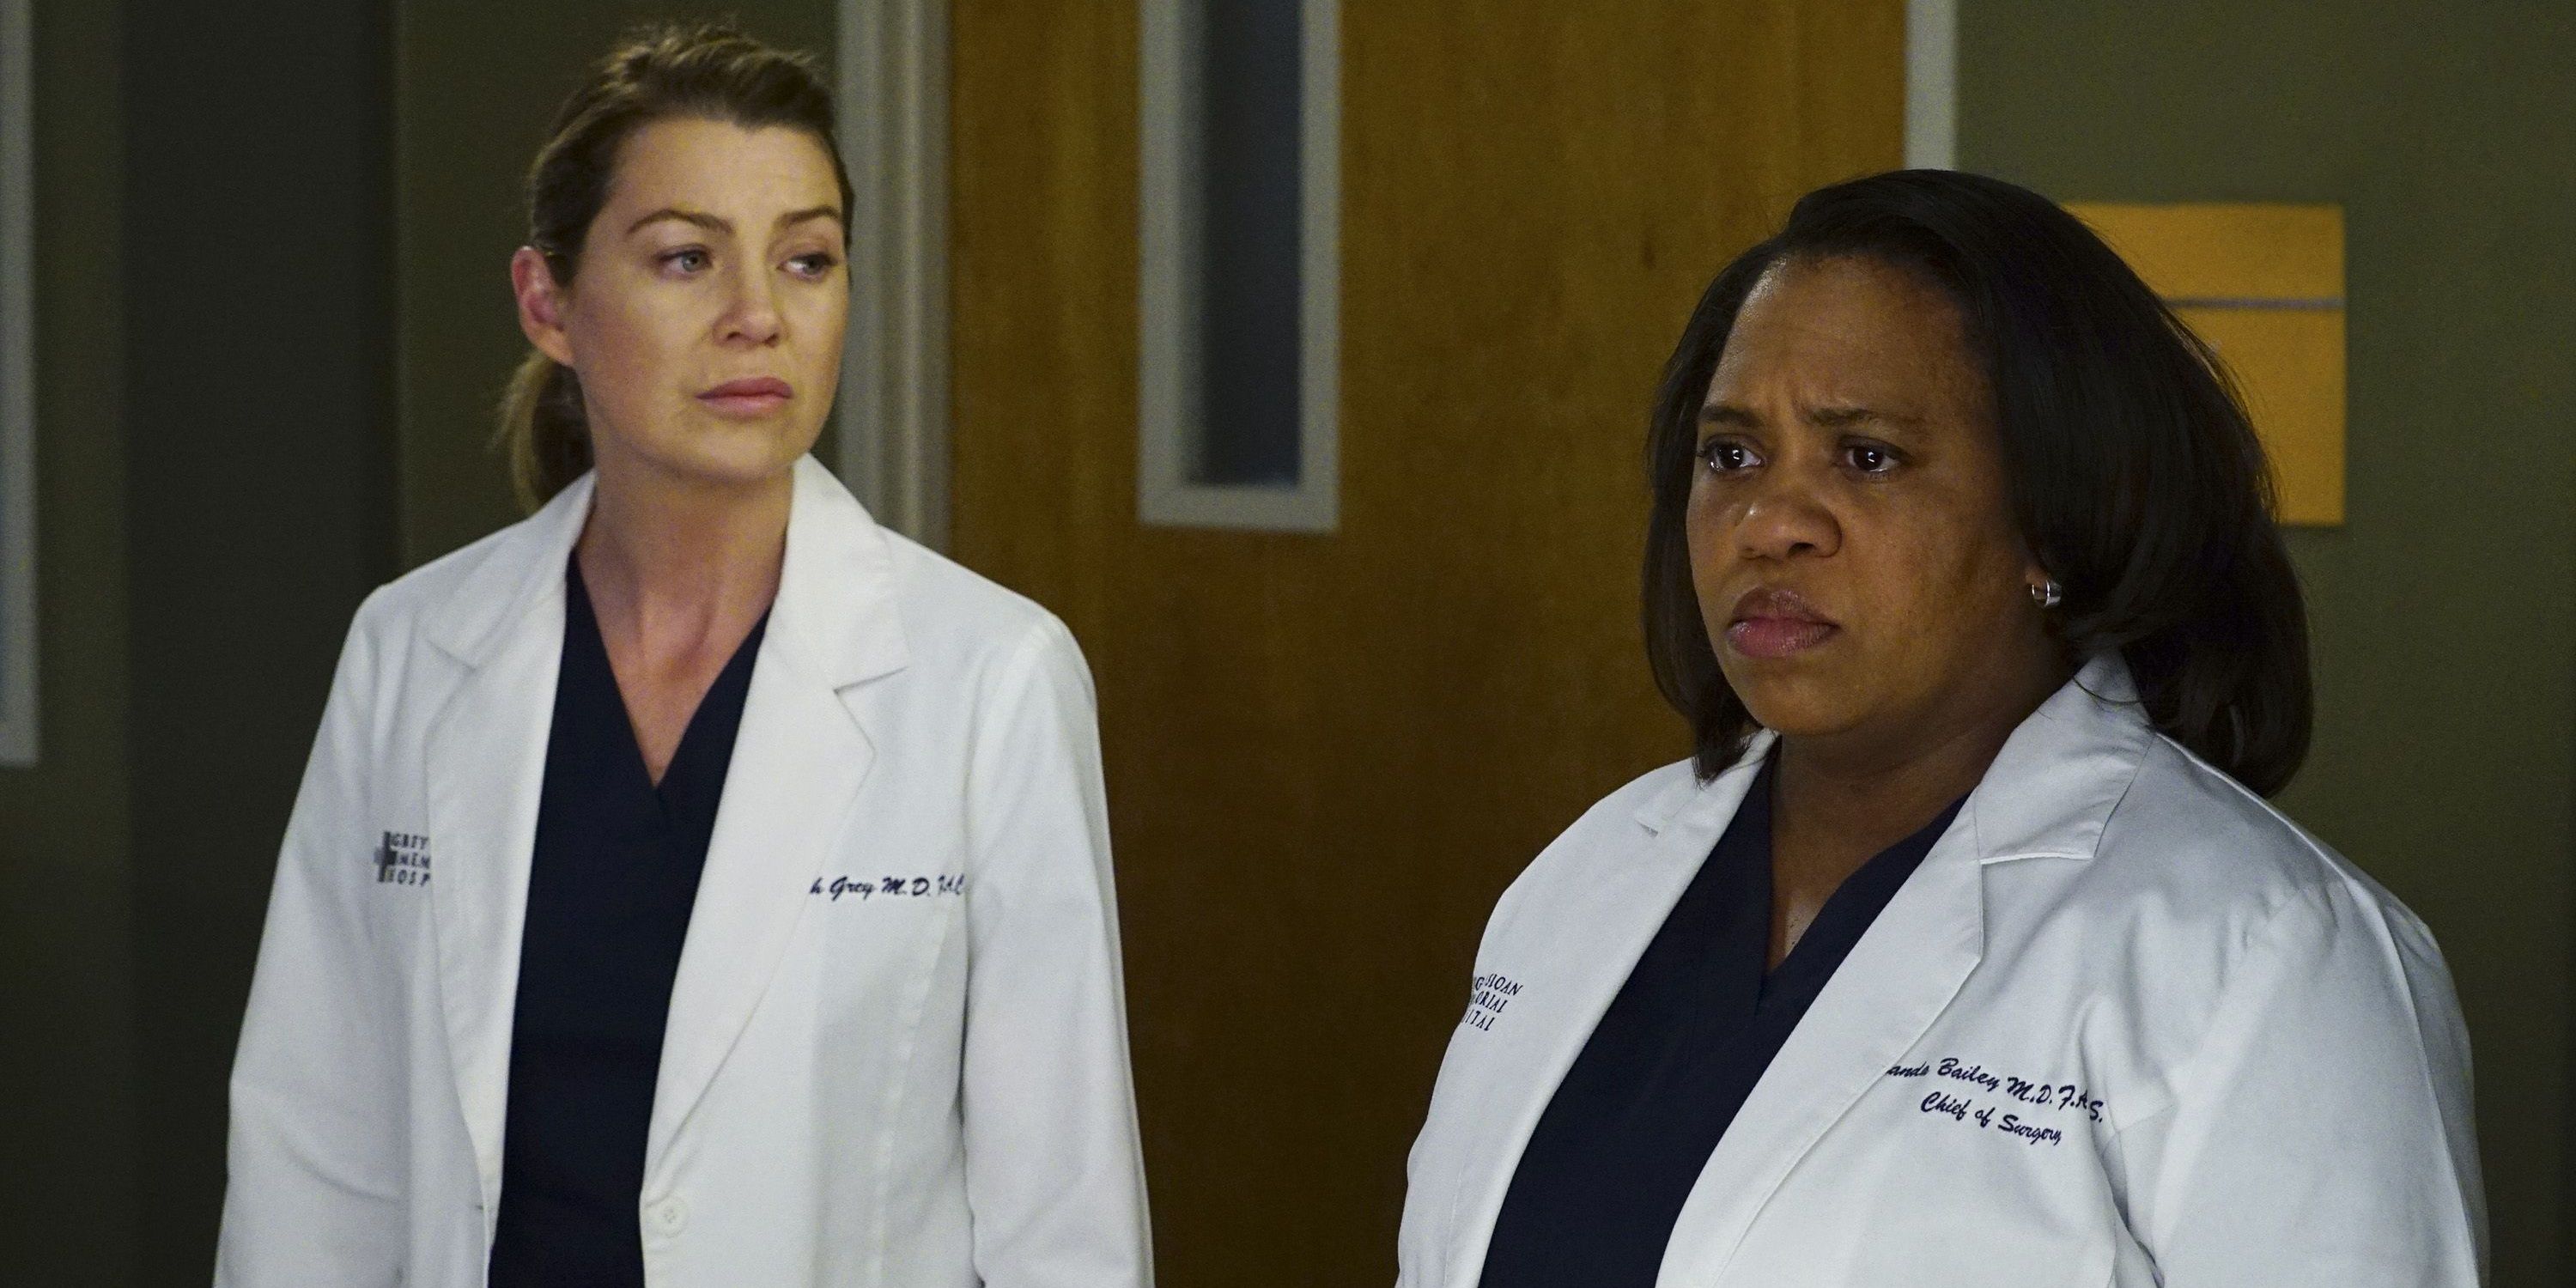 Bailey comforts Mereith after she got distraught over her new nickname in Grey's Anatomy